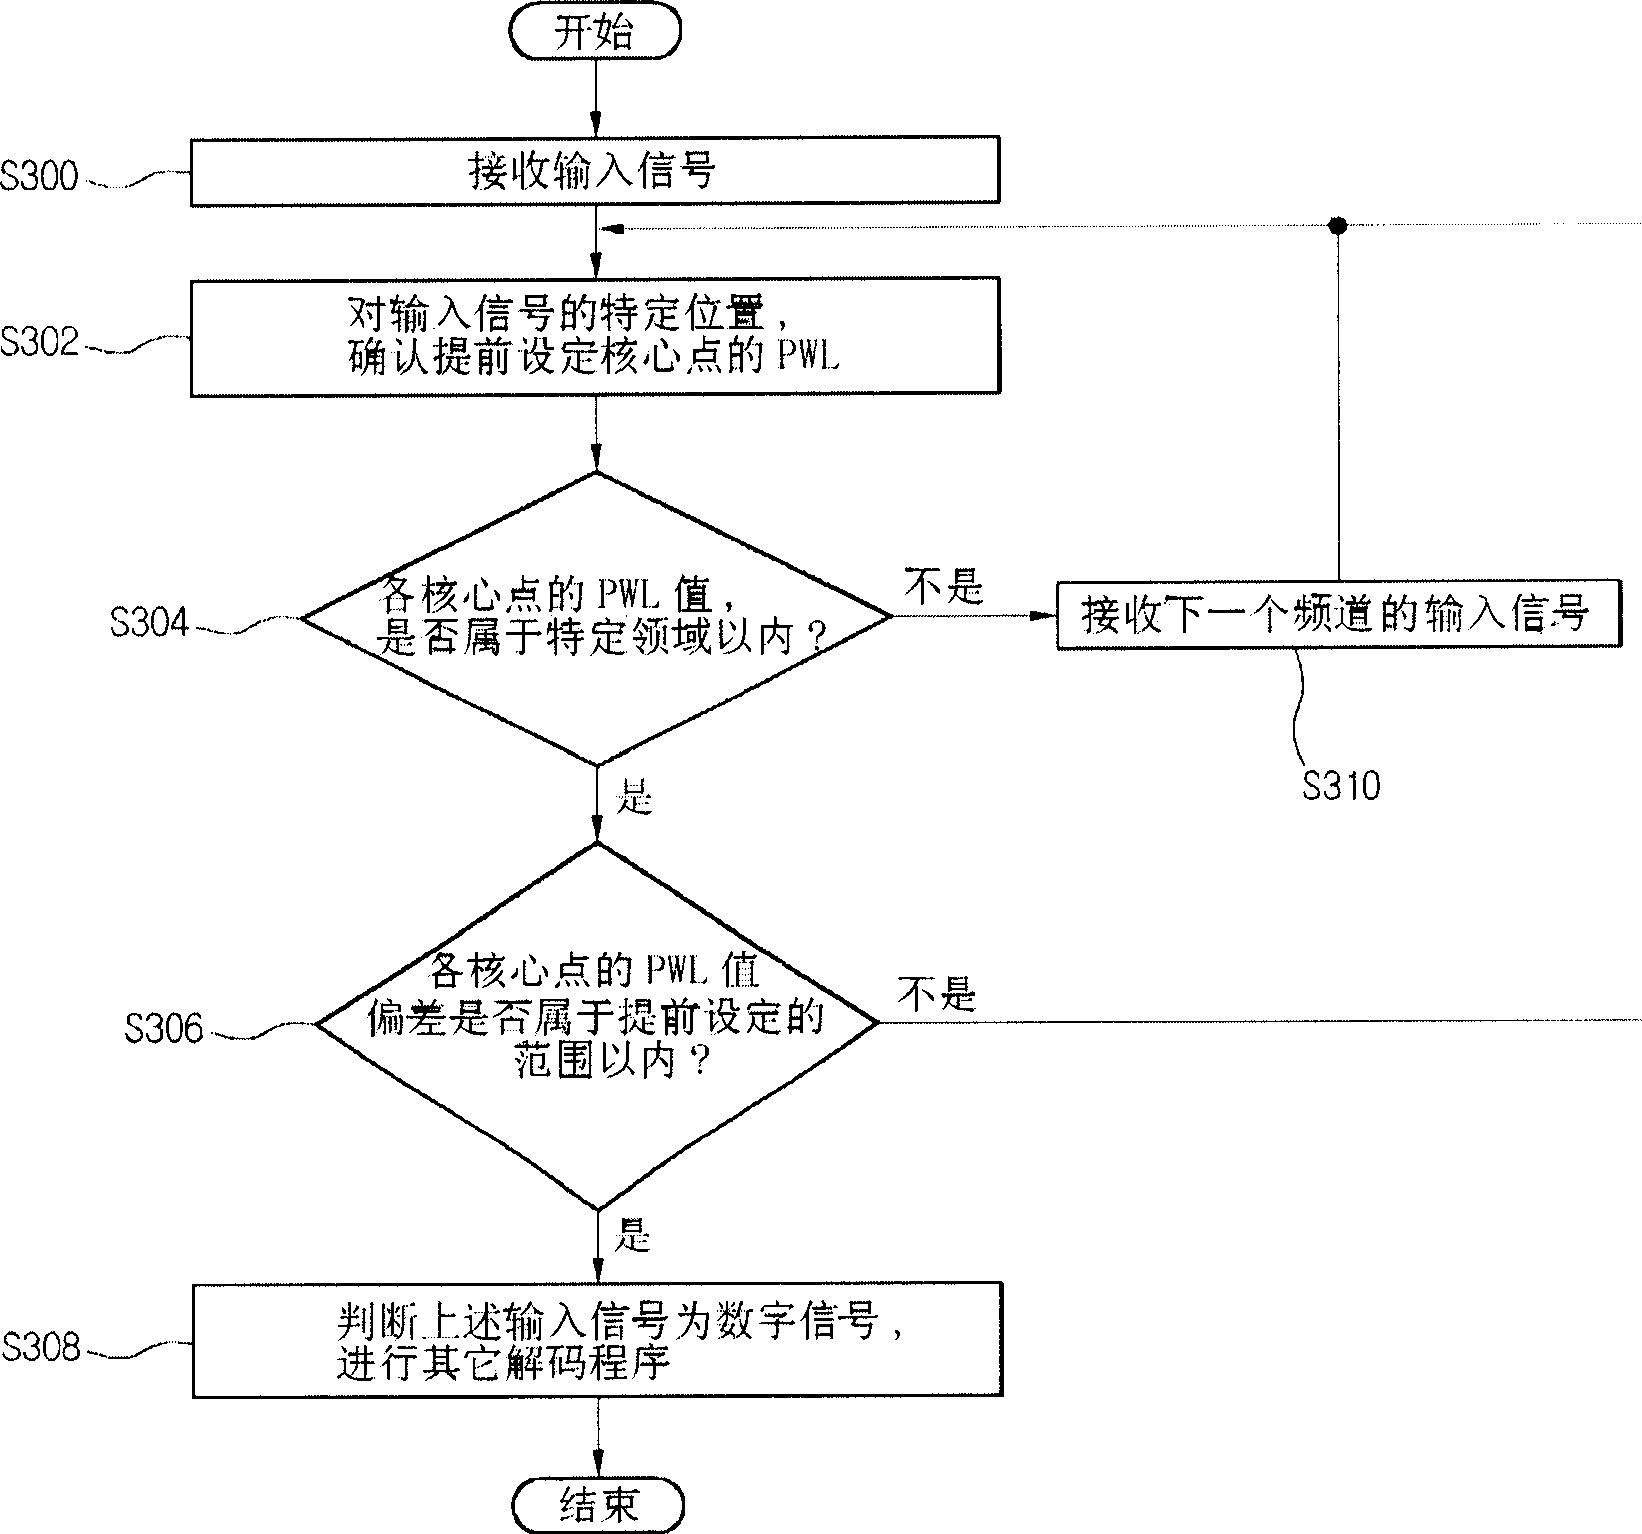 Method for determining whether there is digital signal in digital TV set